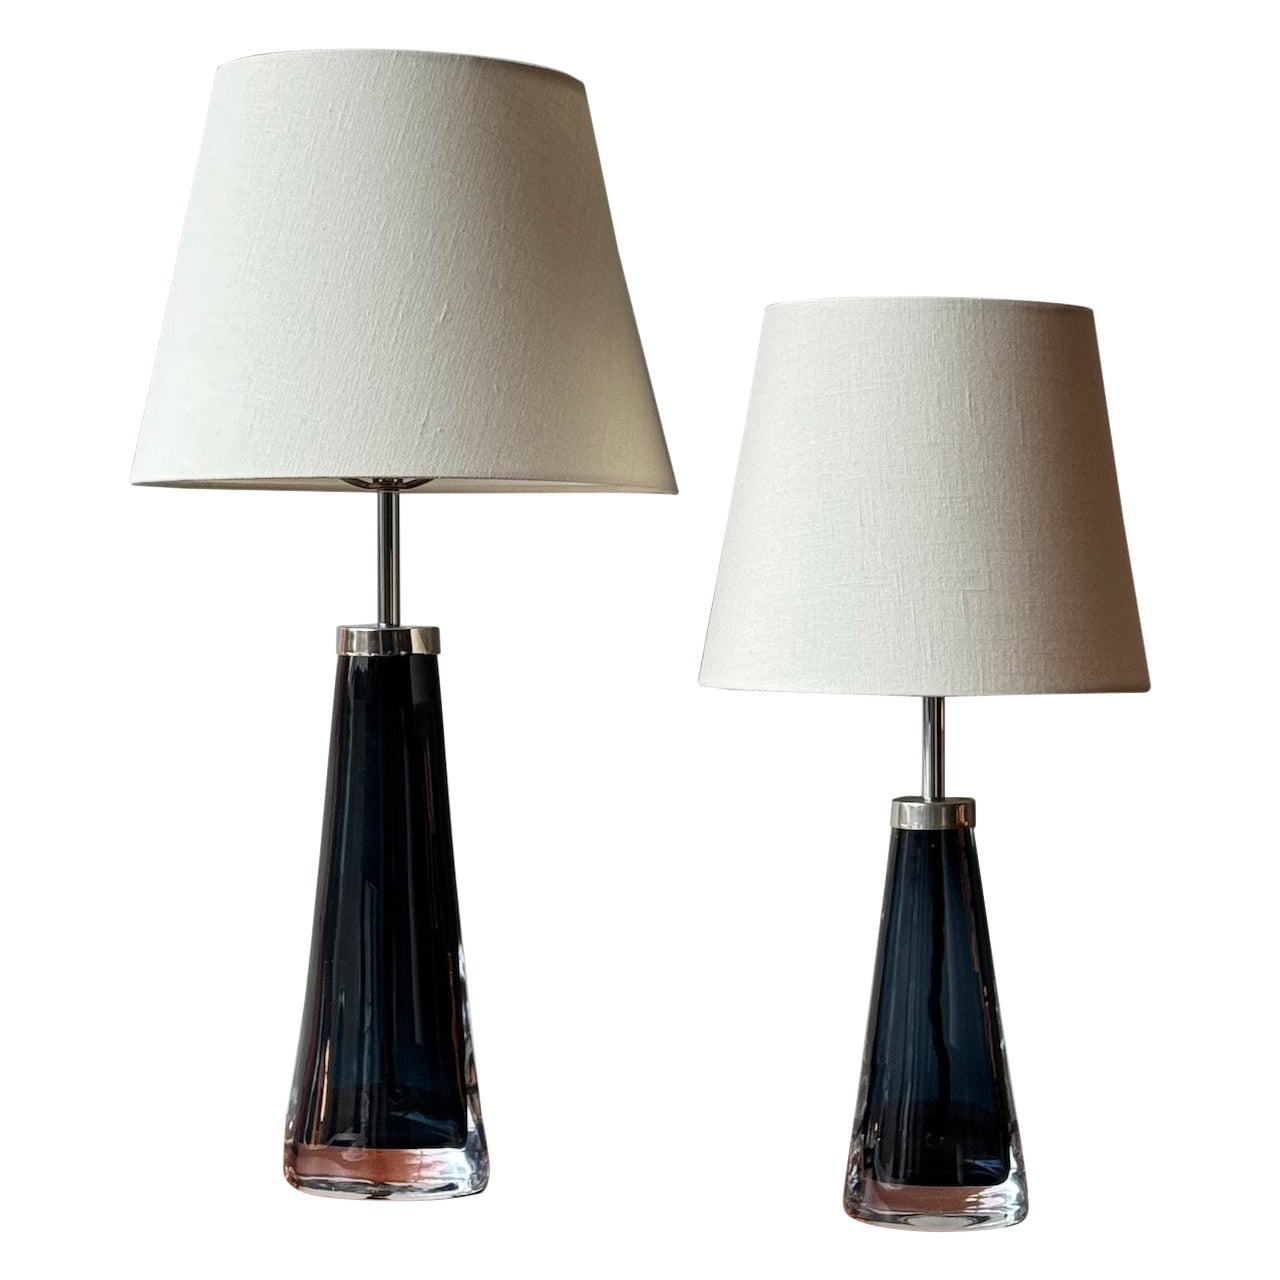 A Pair of Glass Table Lamps, Carl Fagerlund, Orrefors Sweden, 1960s